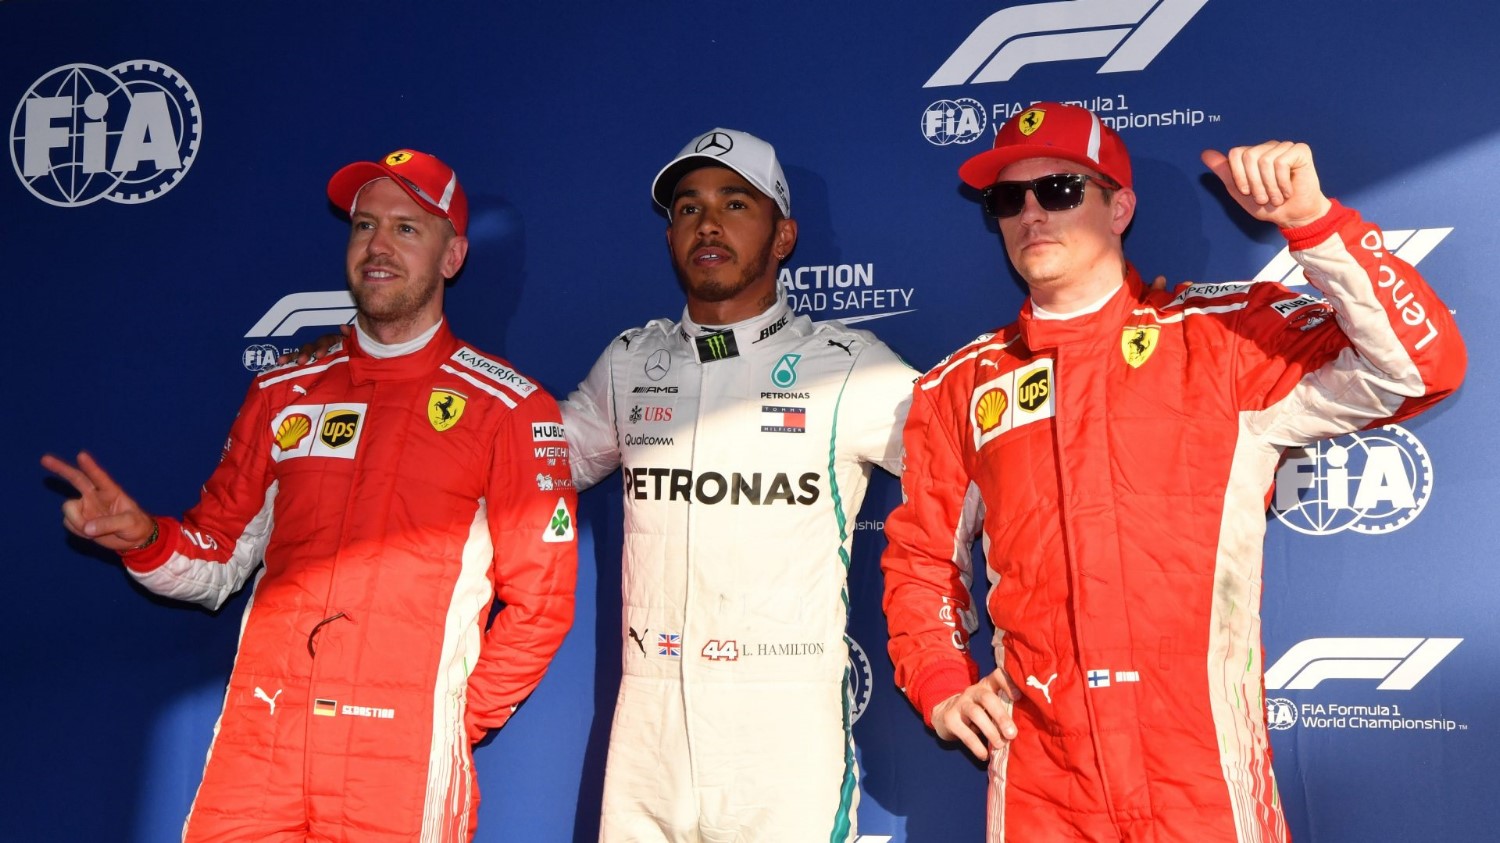 The only way Raikkonen is going to defeat Hamilton or Vettel is with a good dose of luck